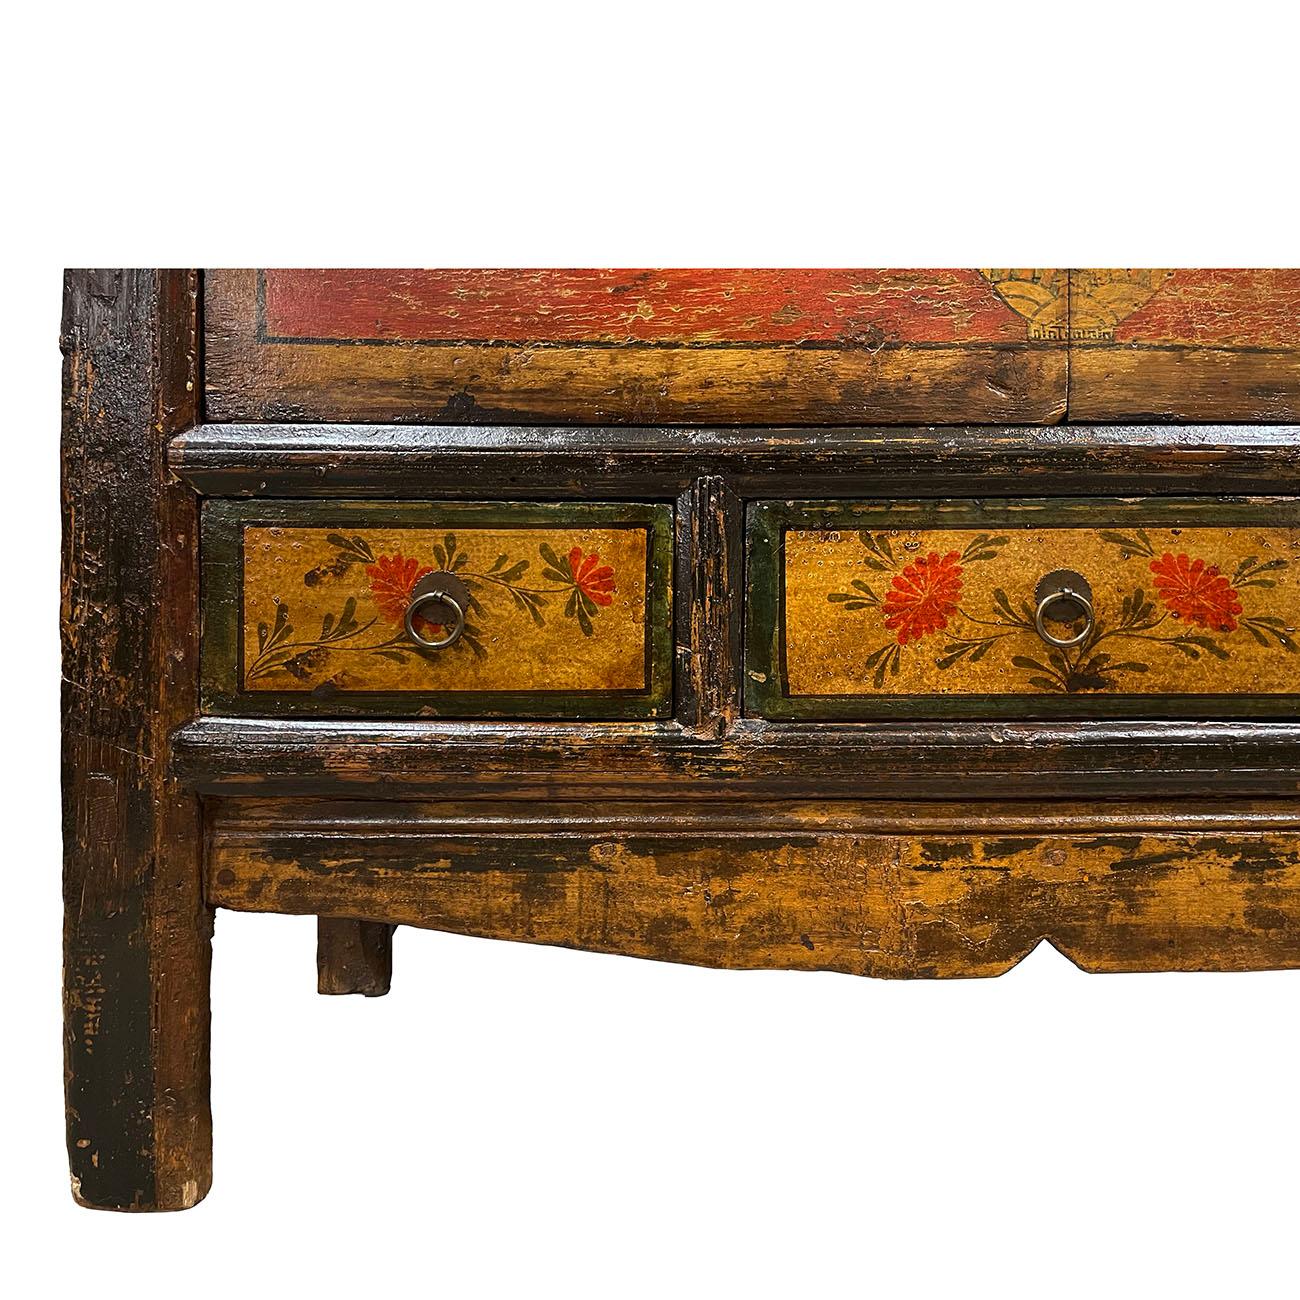 Late 19th Century Antique Chinese Mongolia Cabinet/Buffet Table, Sideboard In Distressed Condition For Sale In Pomona, CA